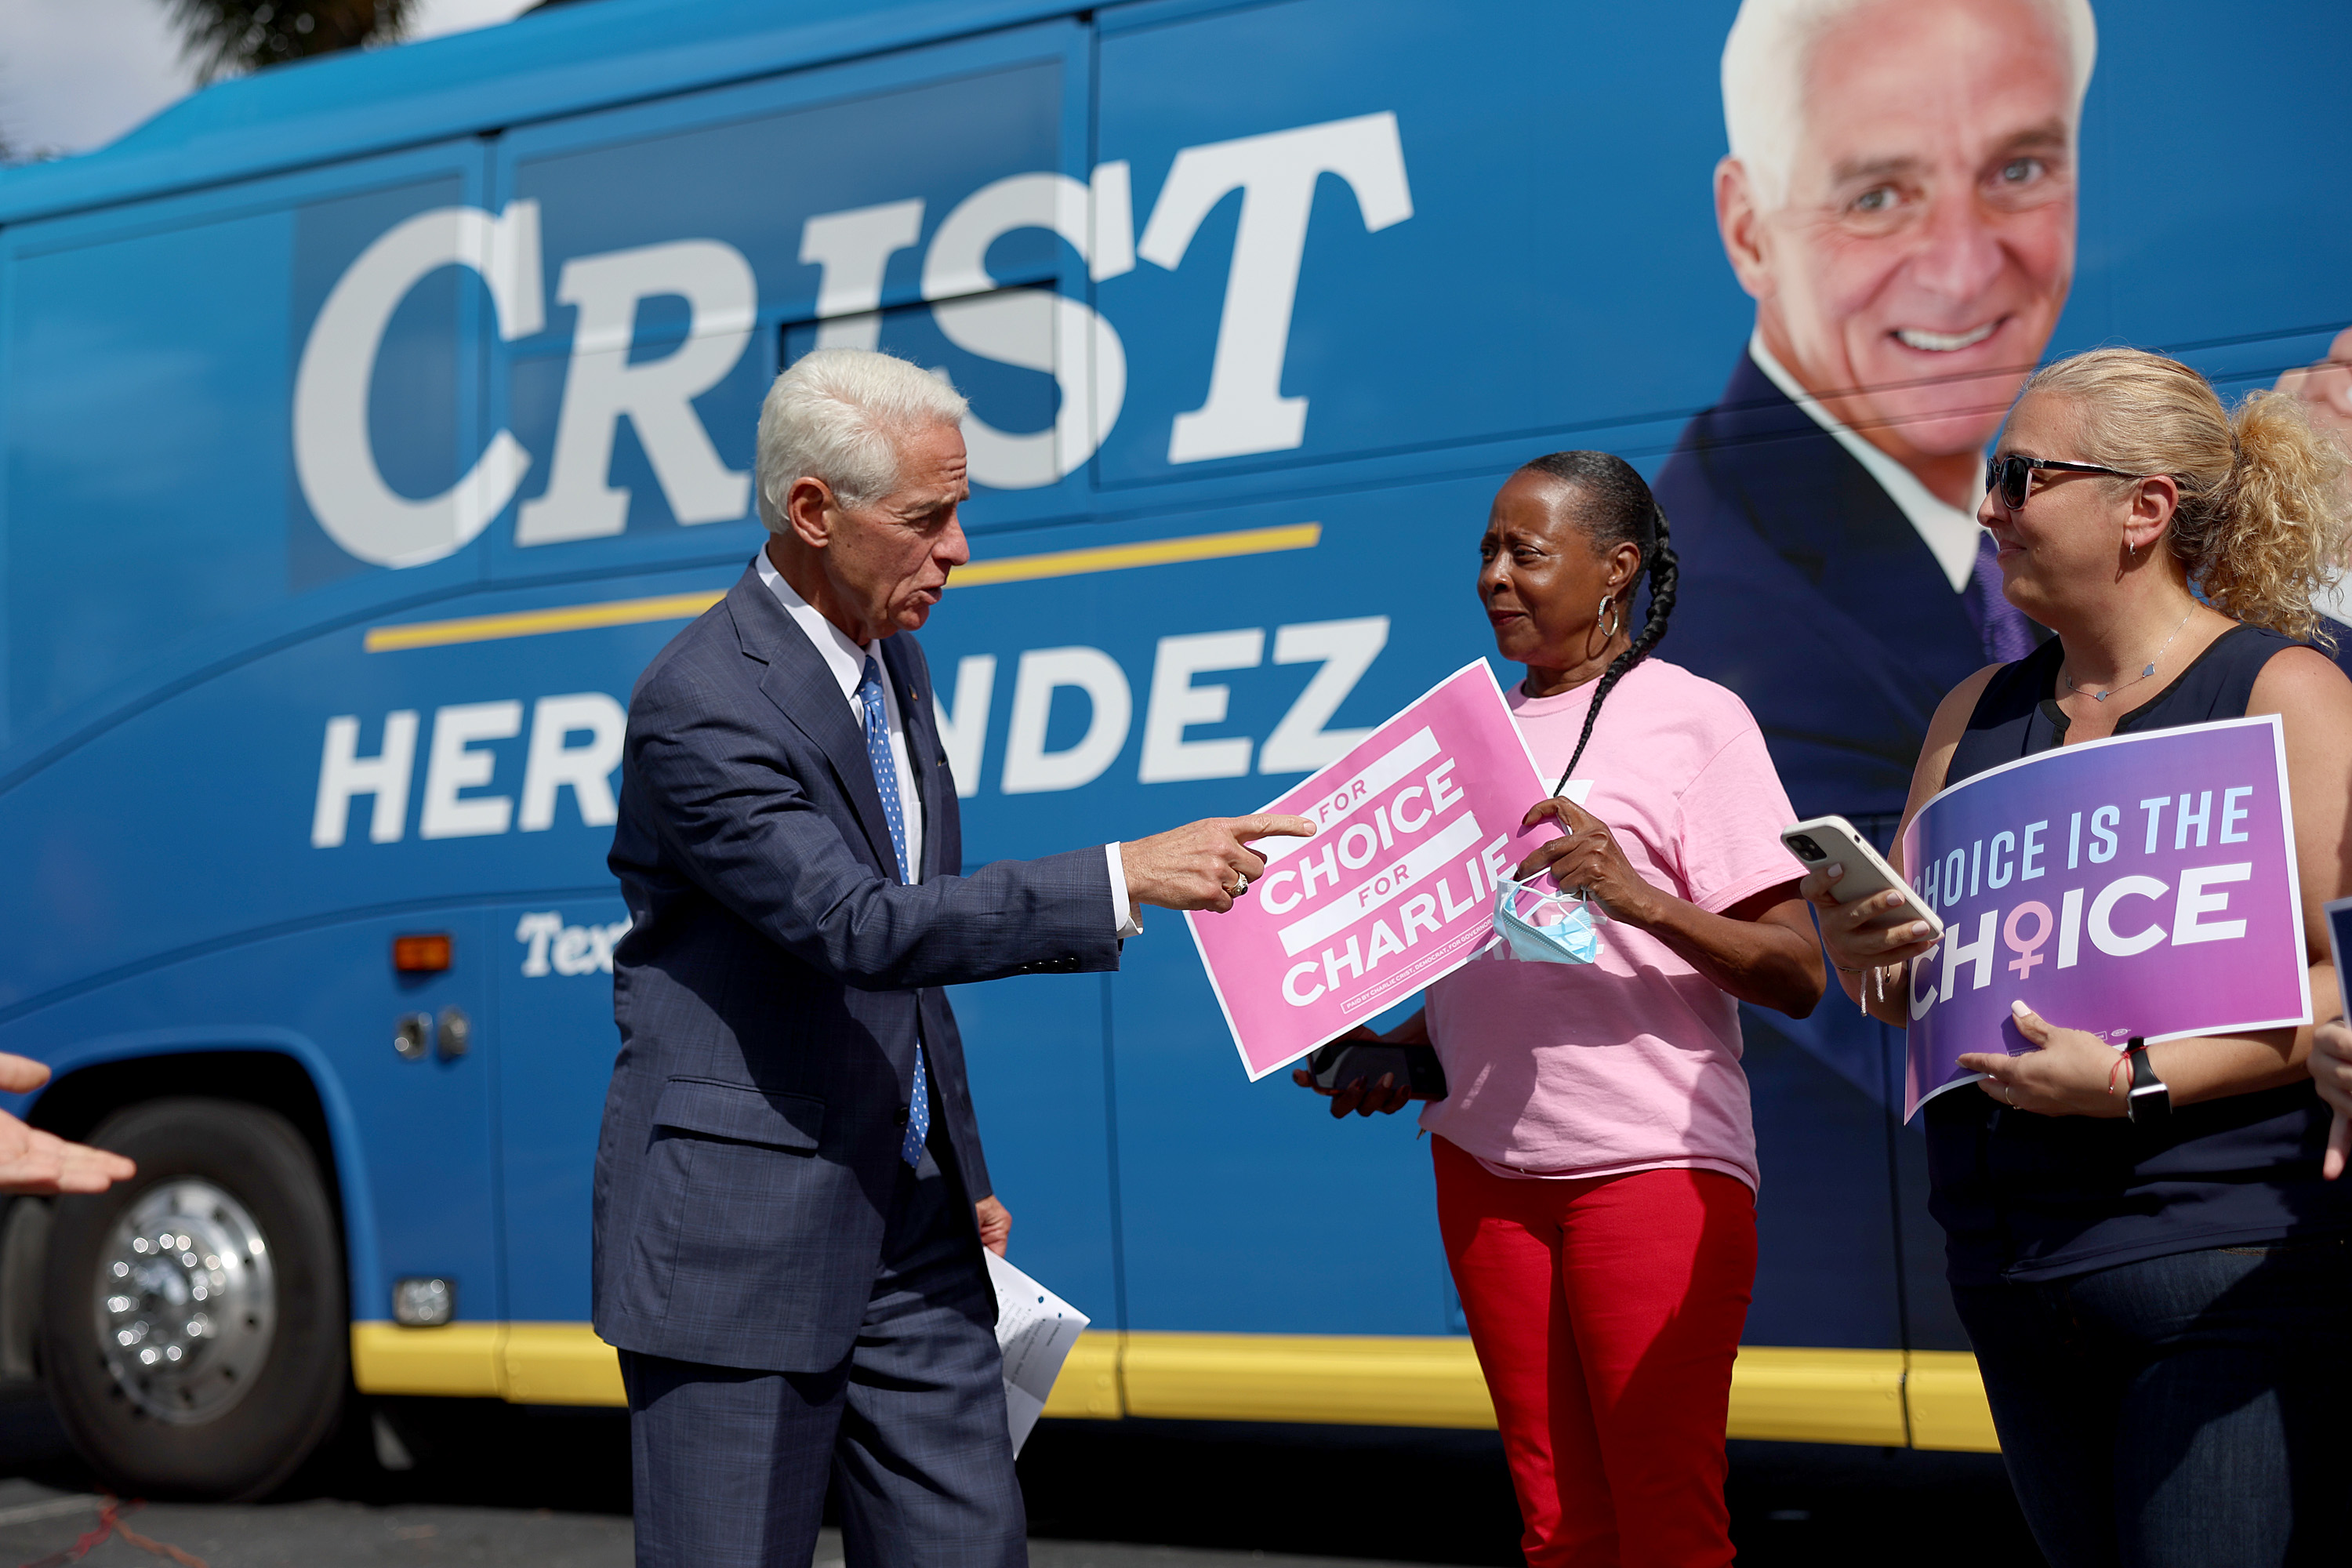 Charlie Crist, the Democratic gubernatorial candidate for Florida, greets supporters.